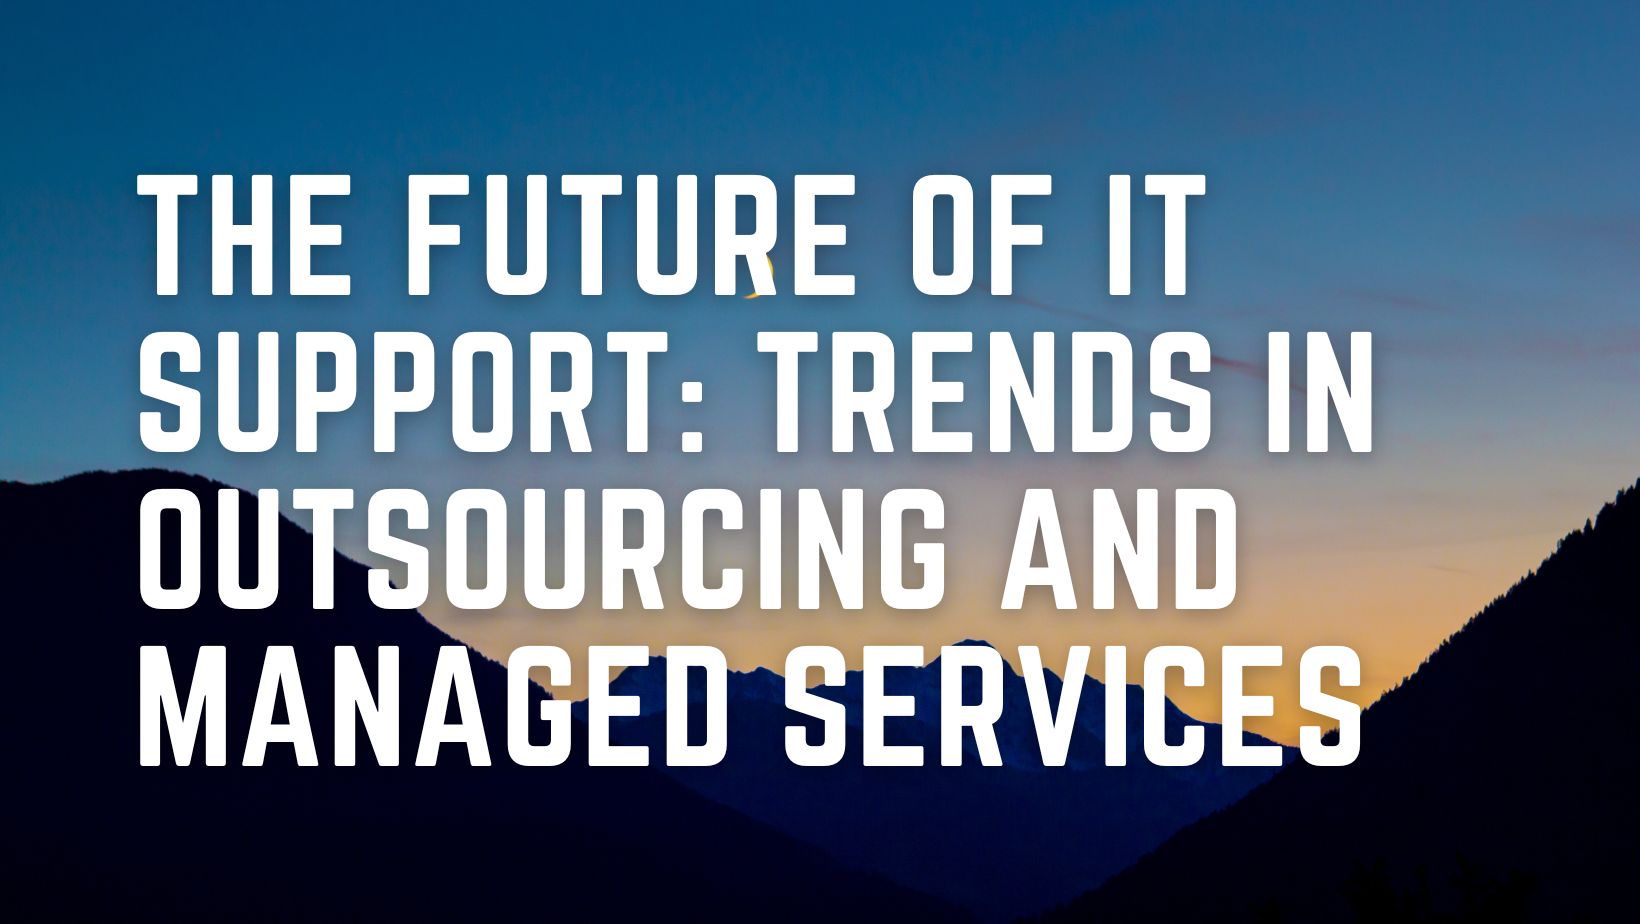 The Future of IT Support: Trends in Outsourcing and Managed Services